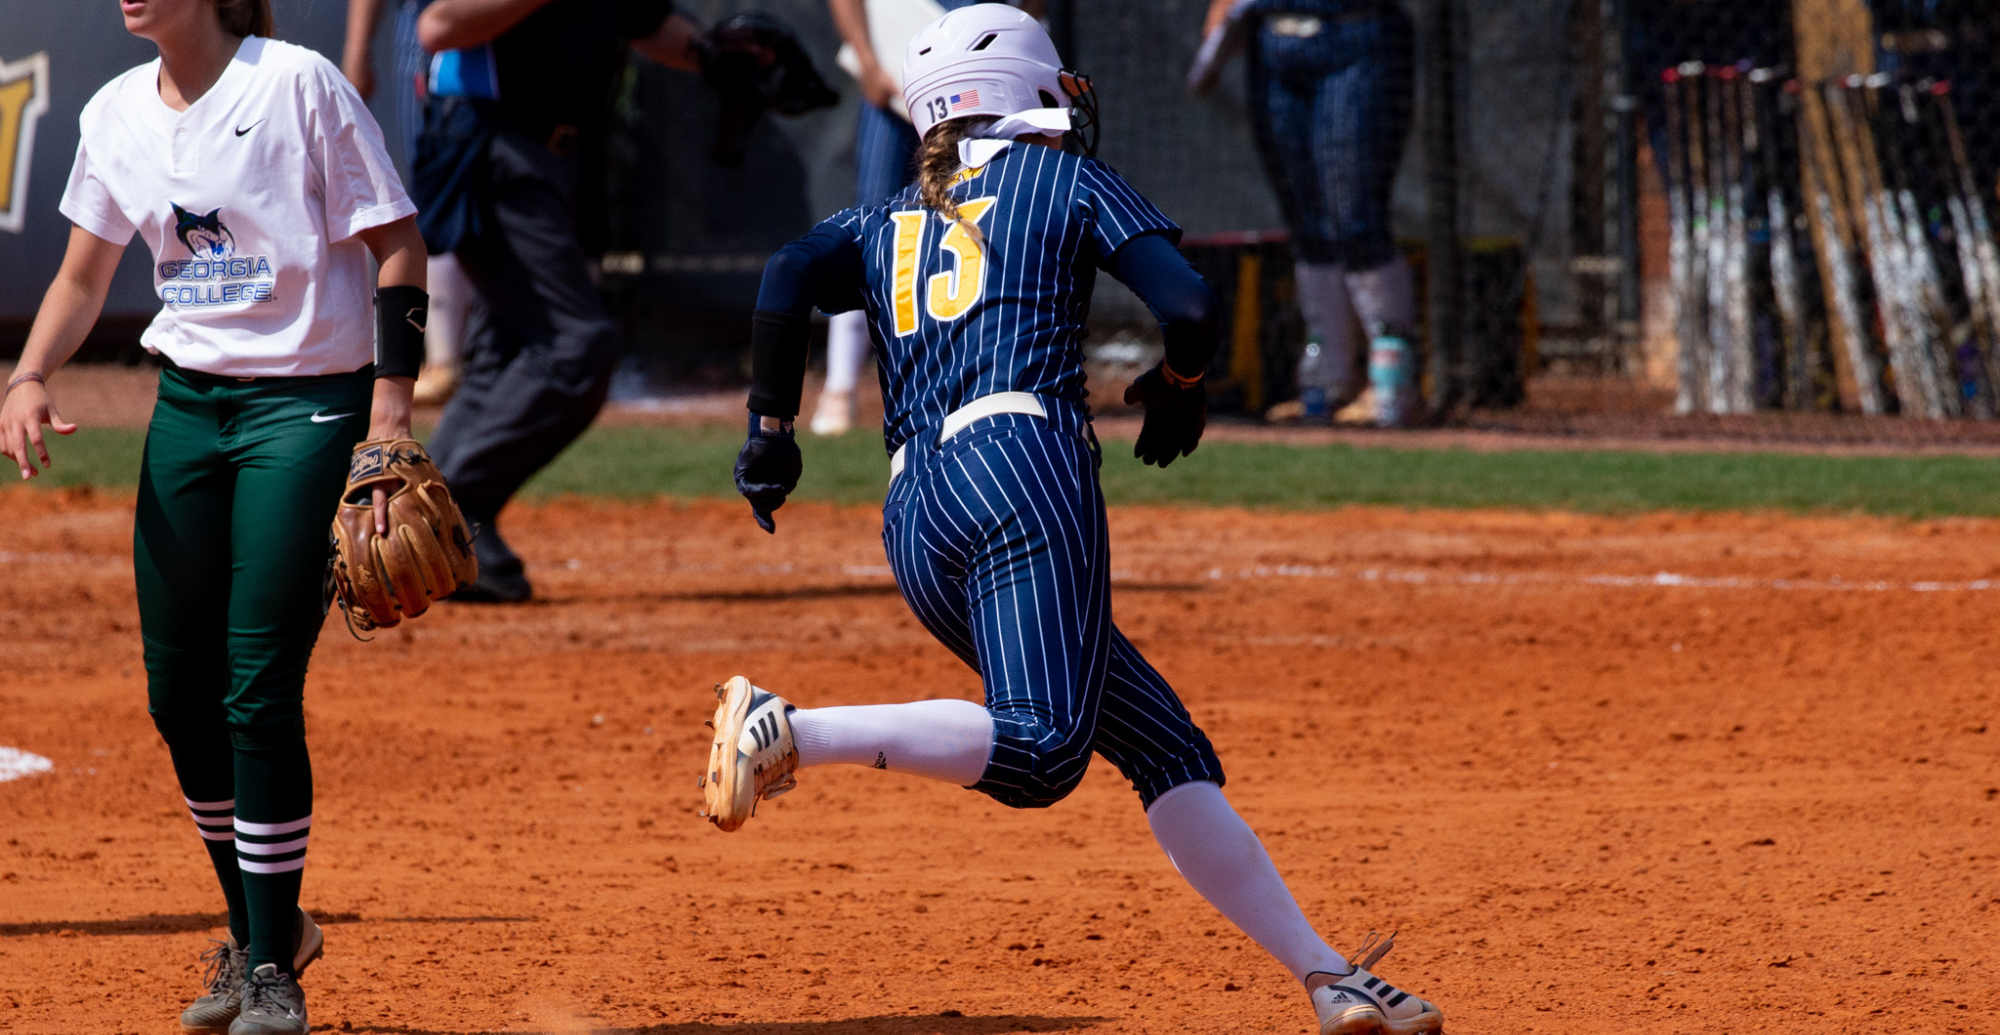 Lady Canes Sweep Albany State in Midweek Doubleheader